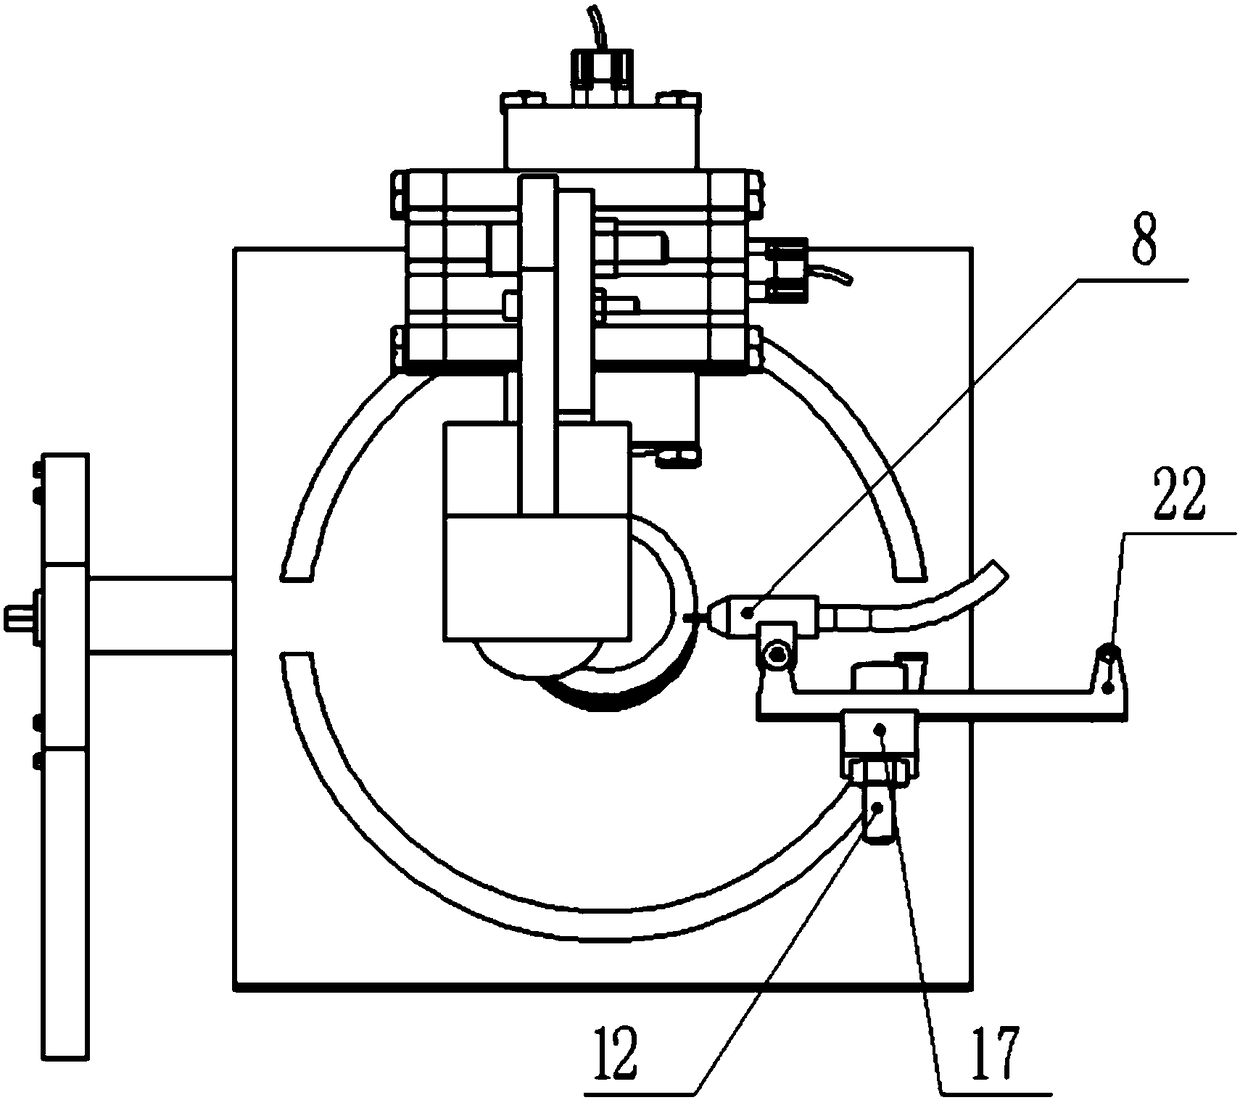 Machine head structure of multifunctional tube-tube full-position automatic TIG welding